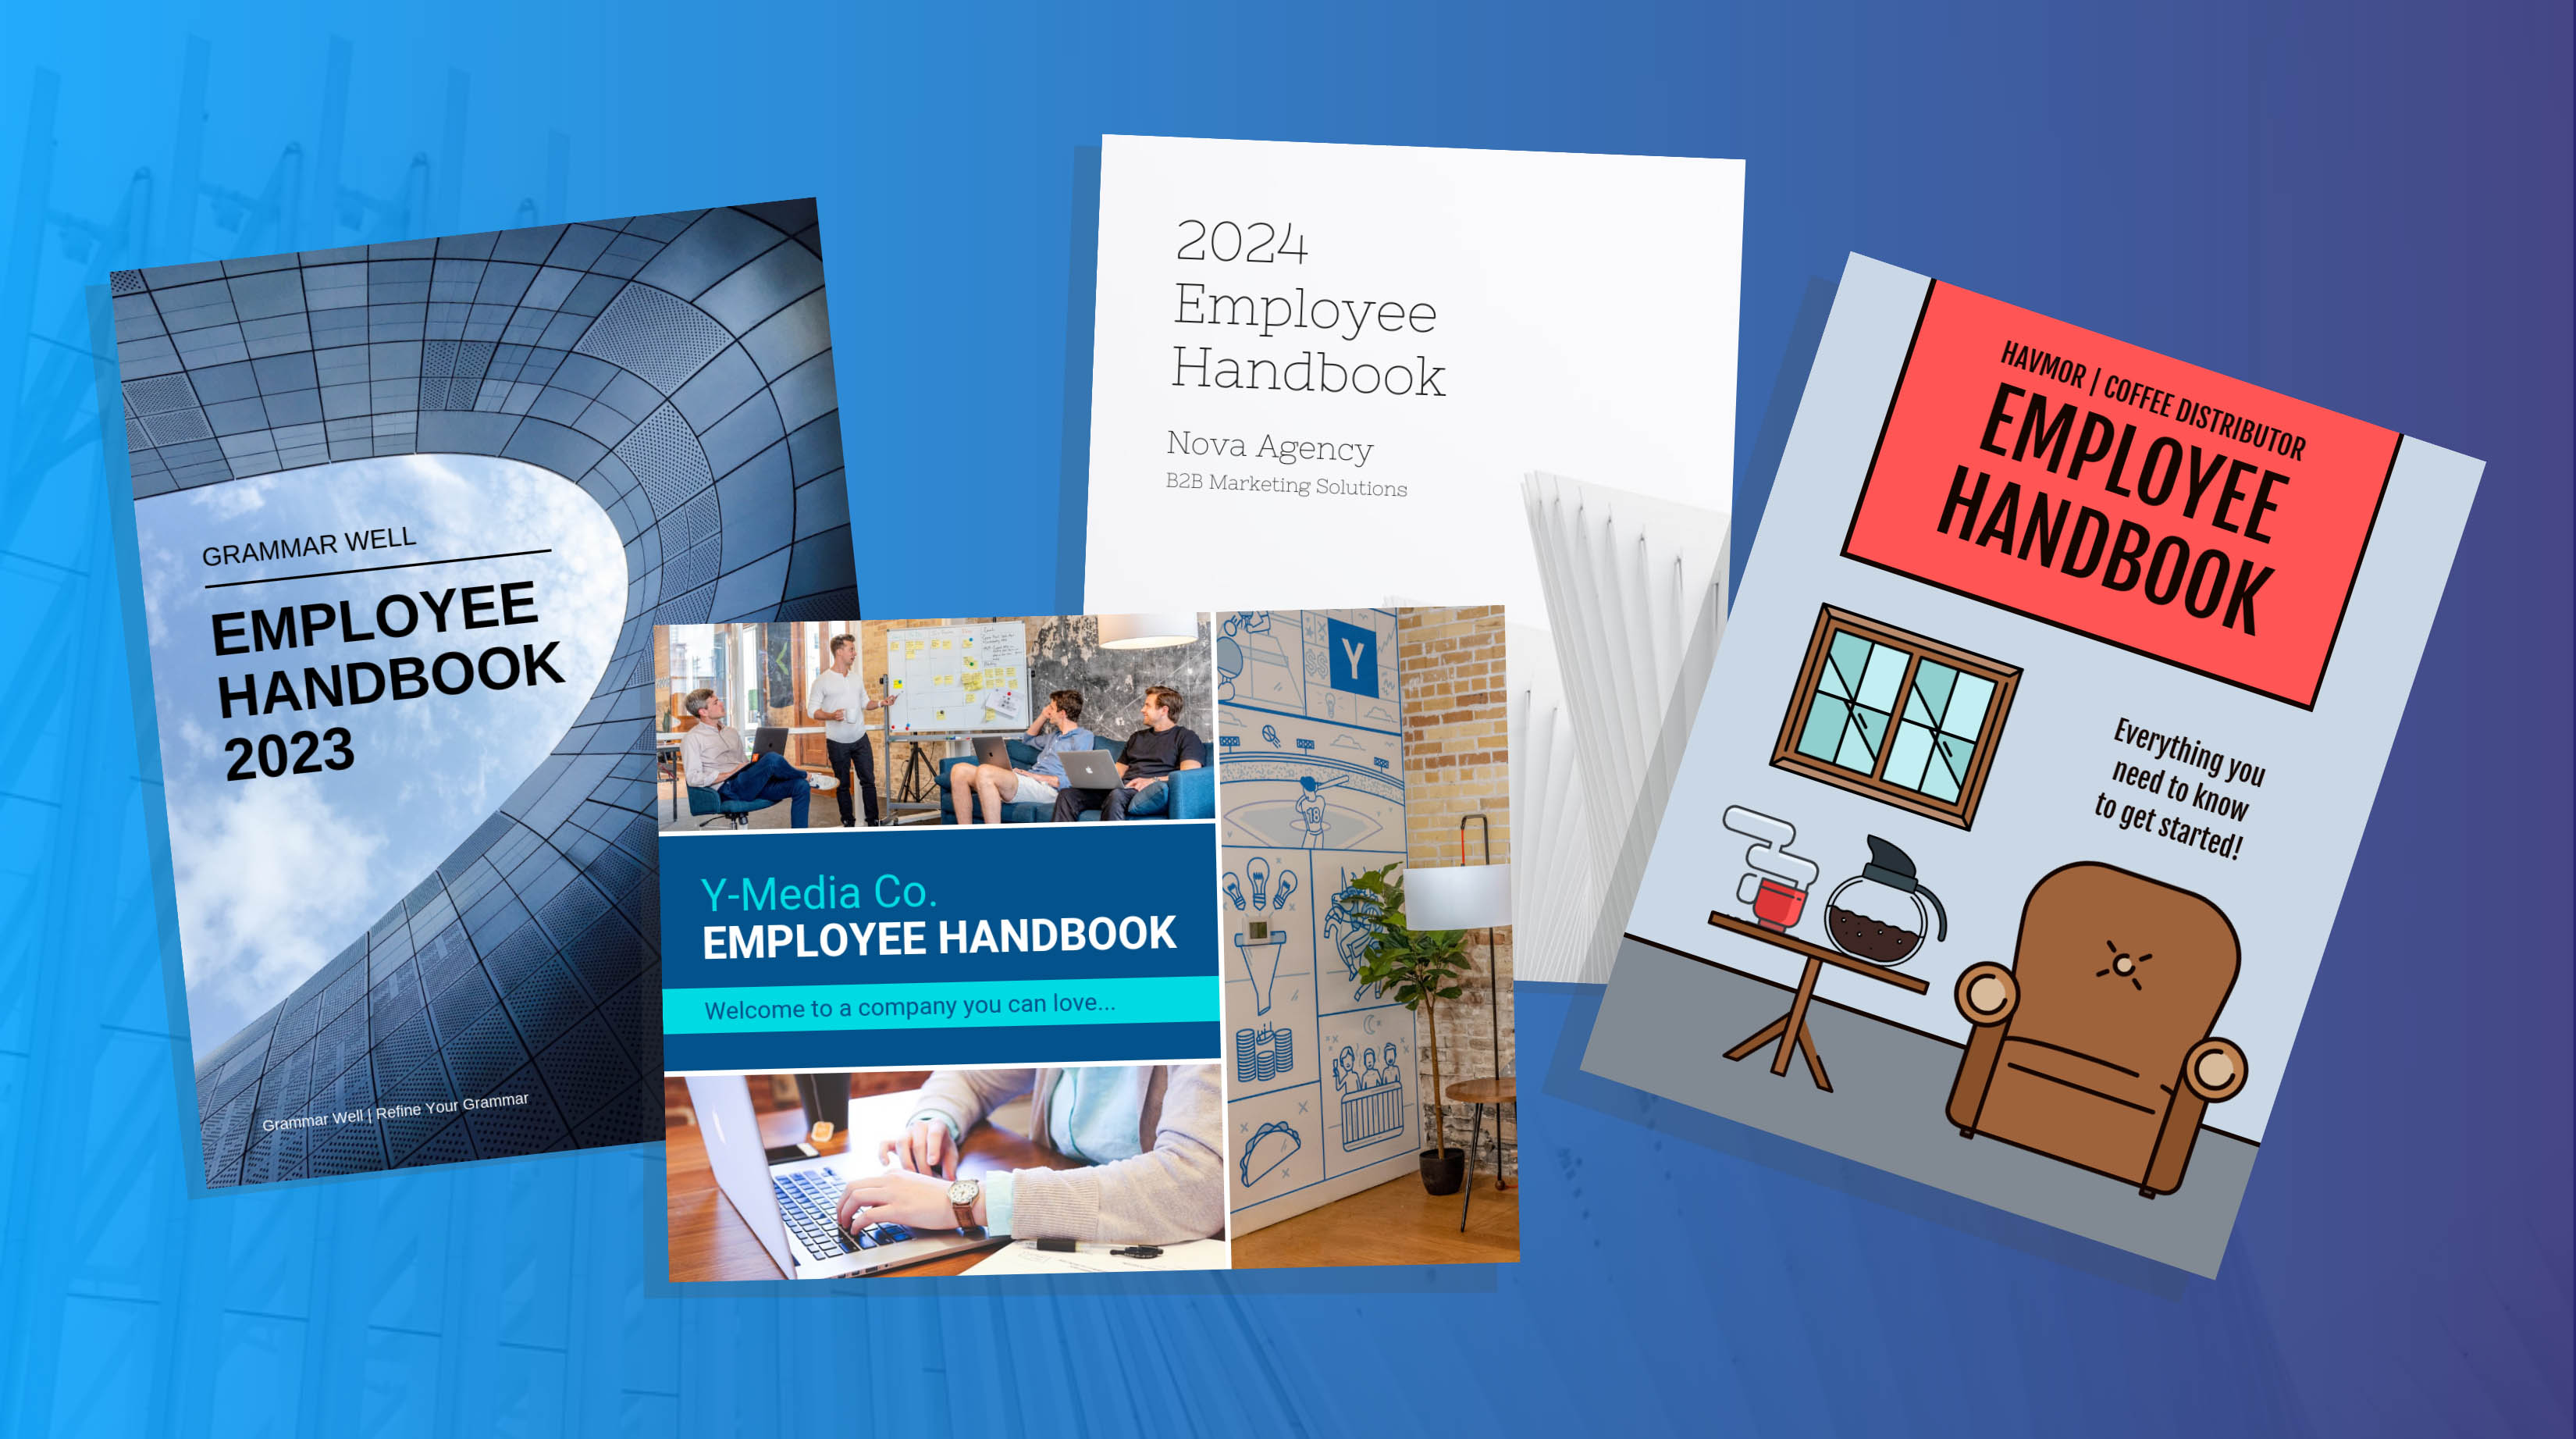 Employee Handbooks are a must for new employees